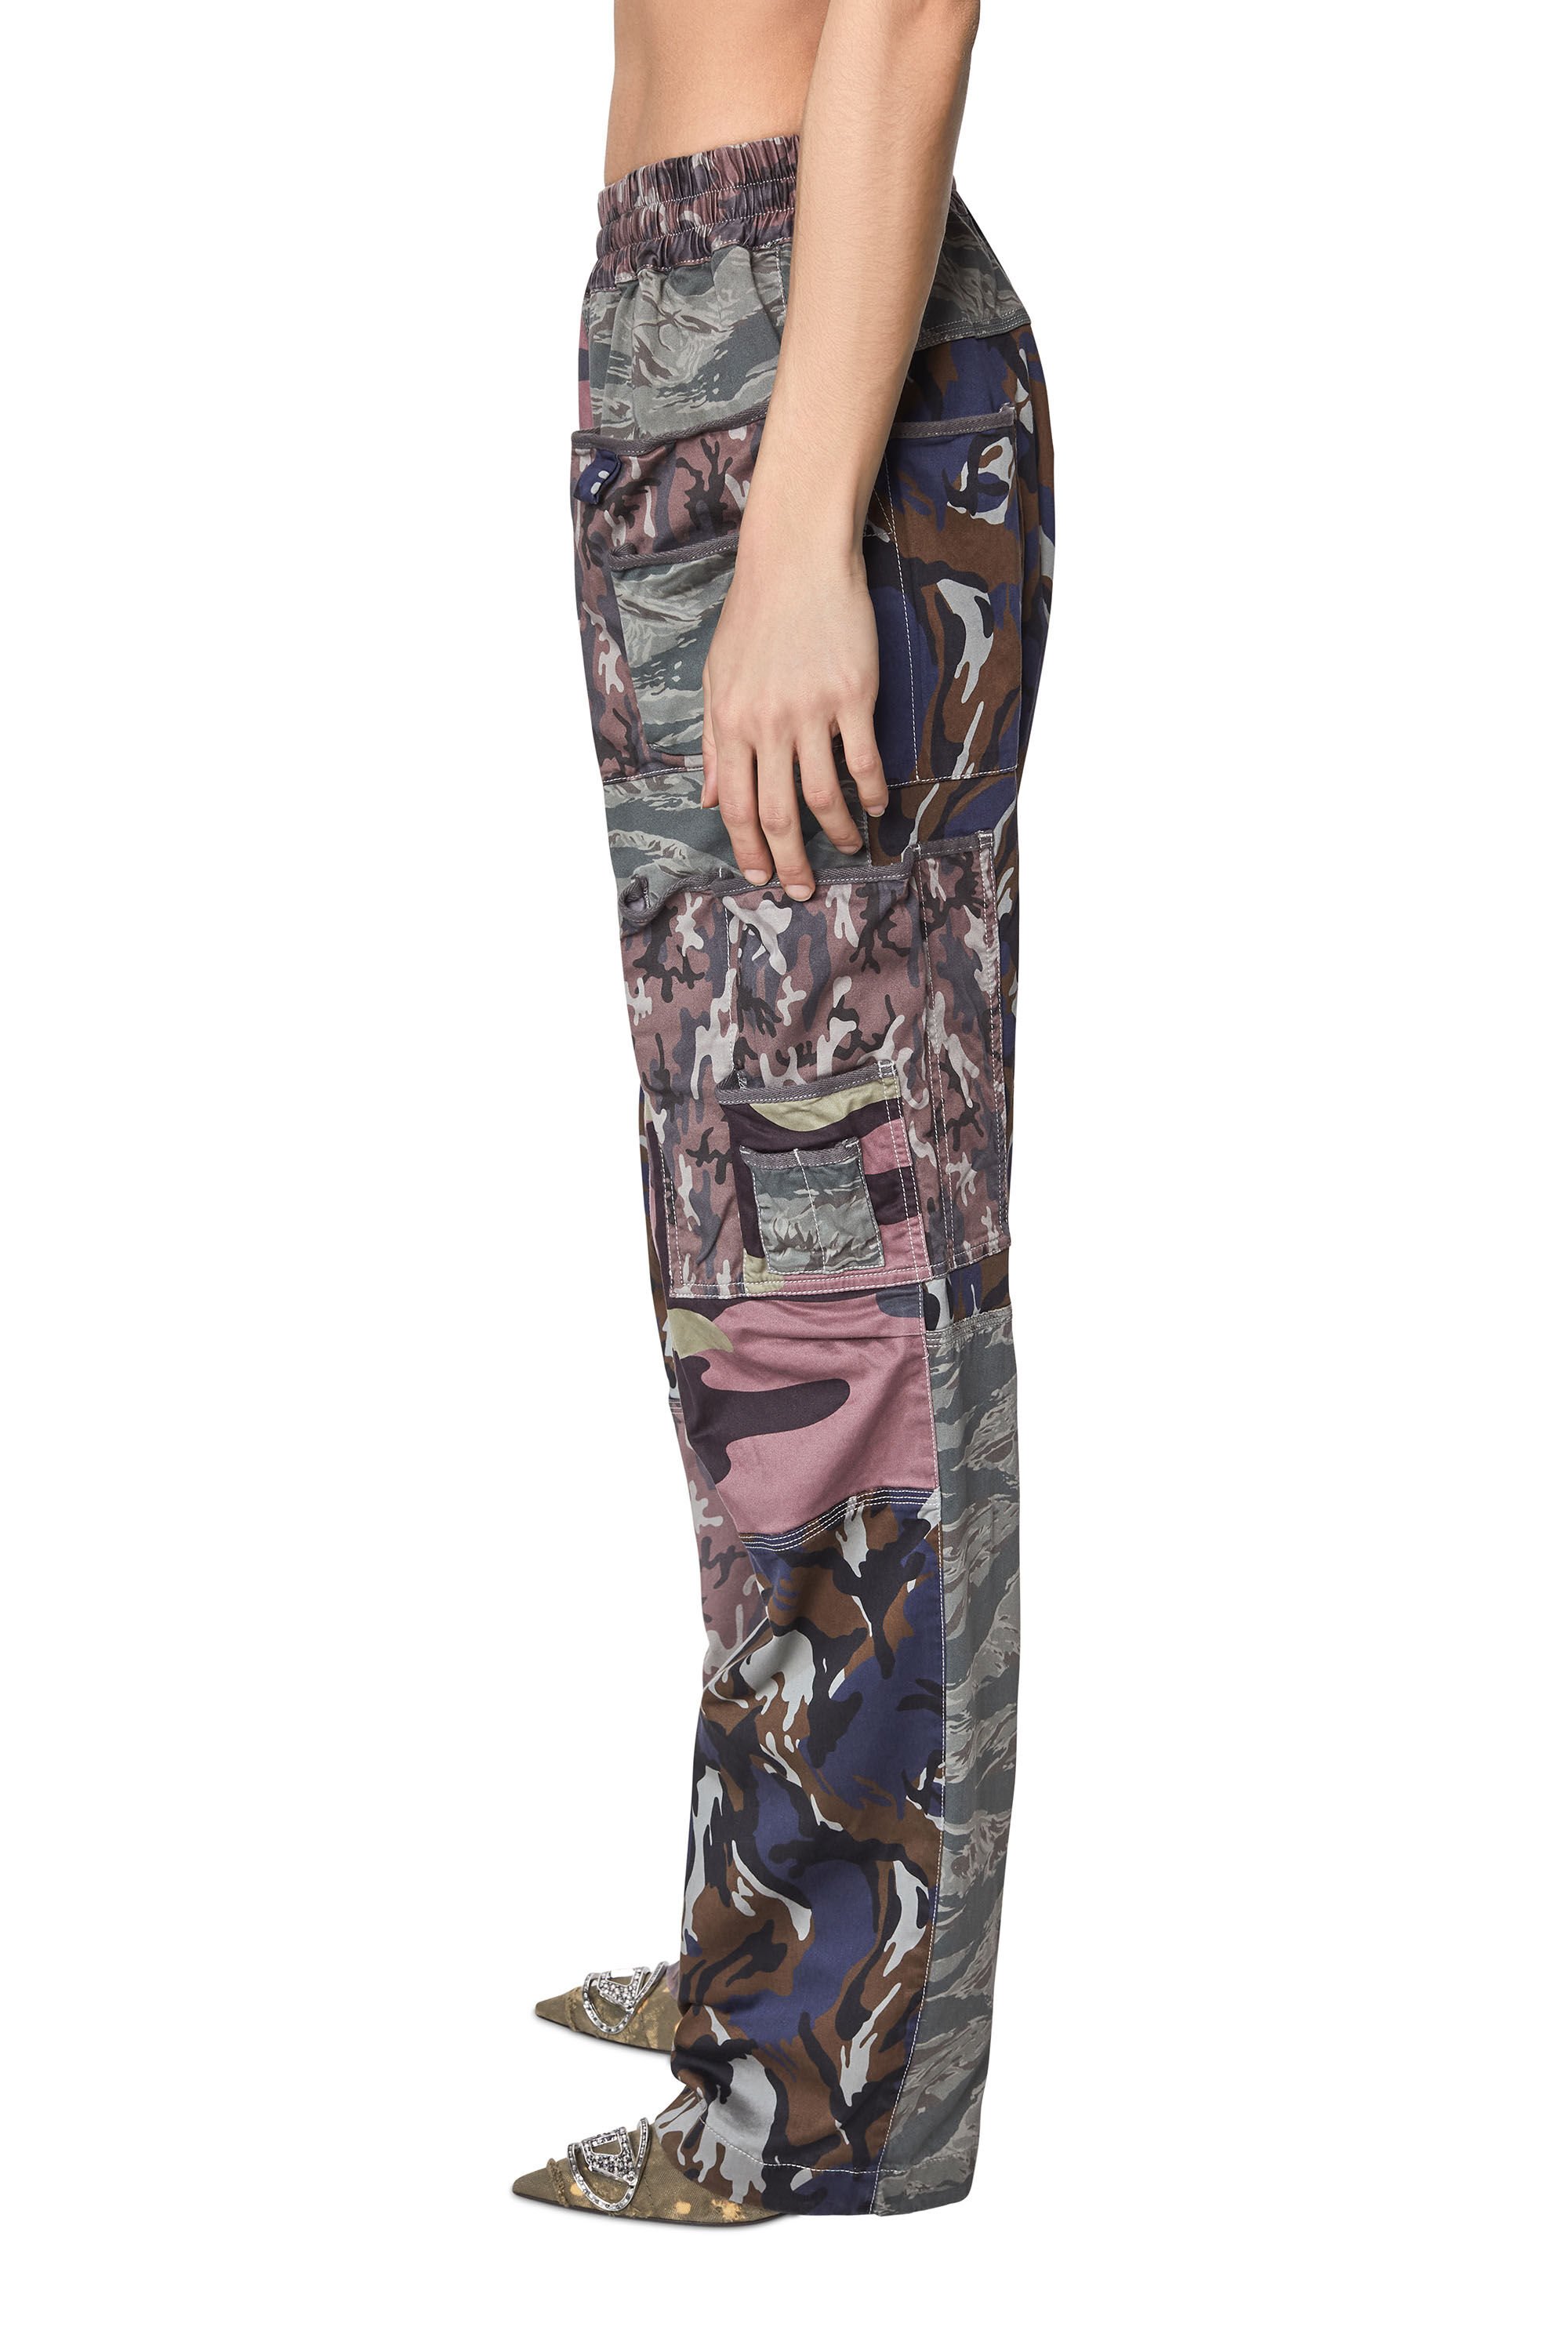 Buy Womens Ladies Camouflage Camo Army Full Length Skinny Fit Leggings With  Pockets 6 8 10 12 14 16 18 Online in India 